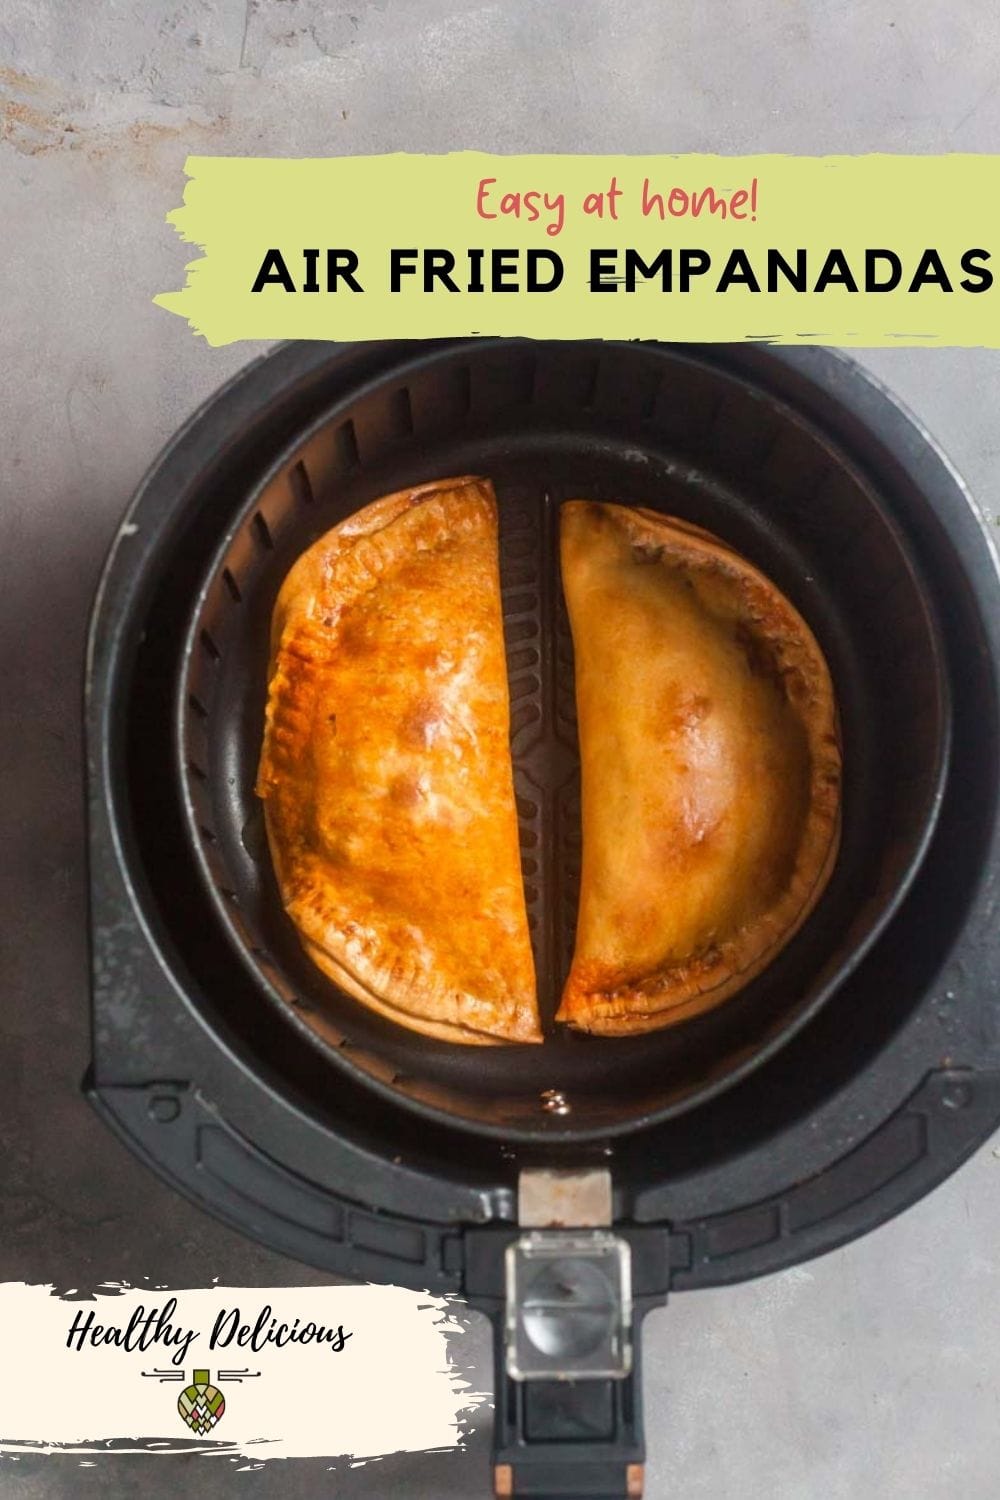 Crispy, crunchy air fryer empanadas are so easy to make at home without the mess or uncertain timing of deep-frying. These come out of the air fryer perfectly crisp and golden brown every time. Plus you can use any filling you want, which makes them great for picky eaters! Use leftover chili, chicken, or cheese! via @HealthyDelish